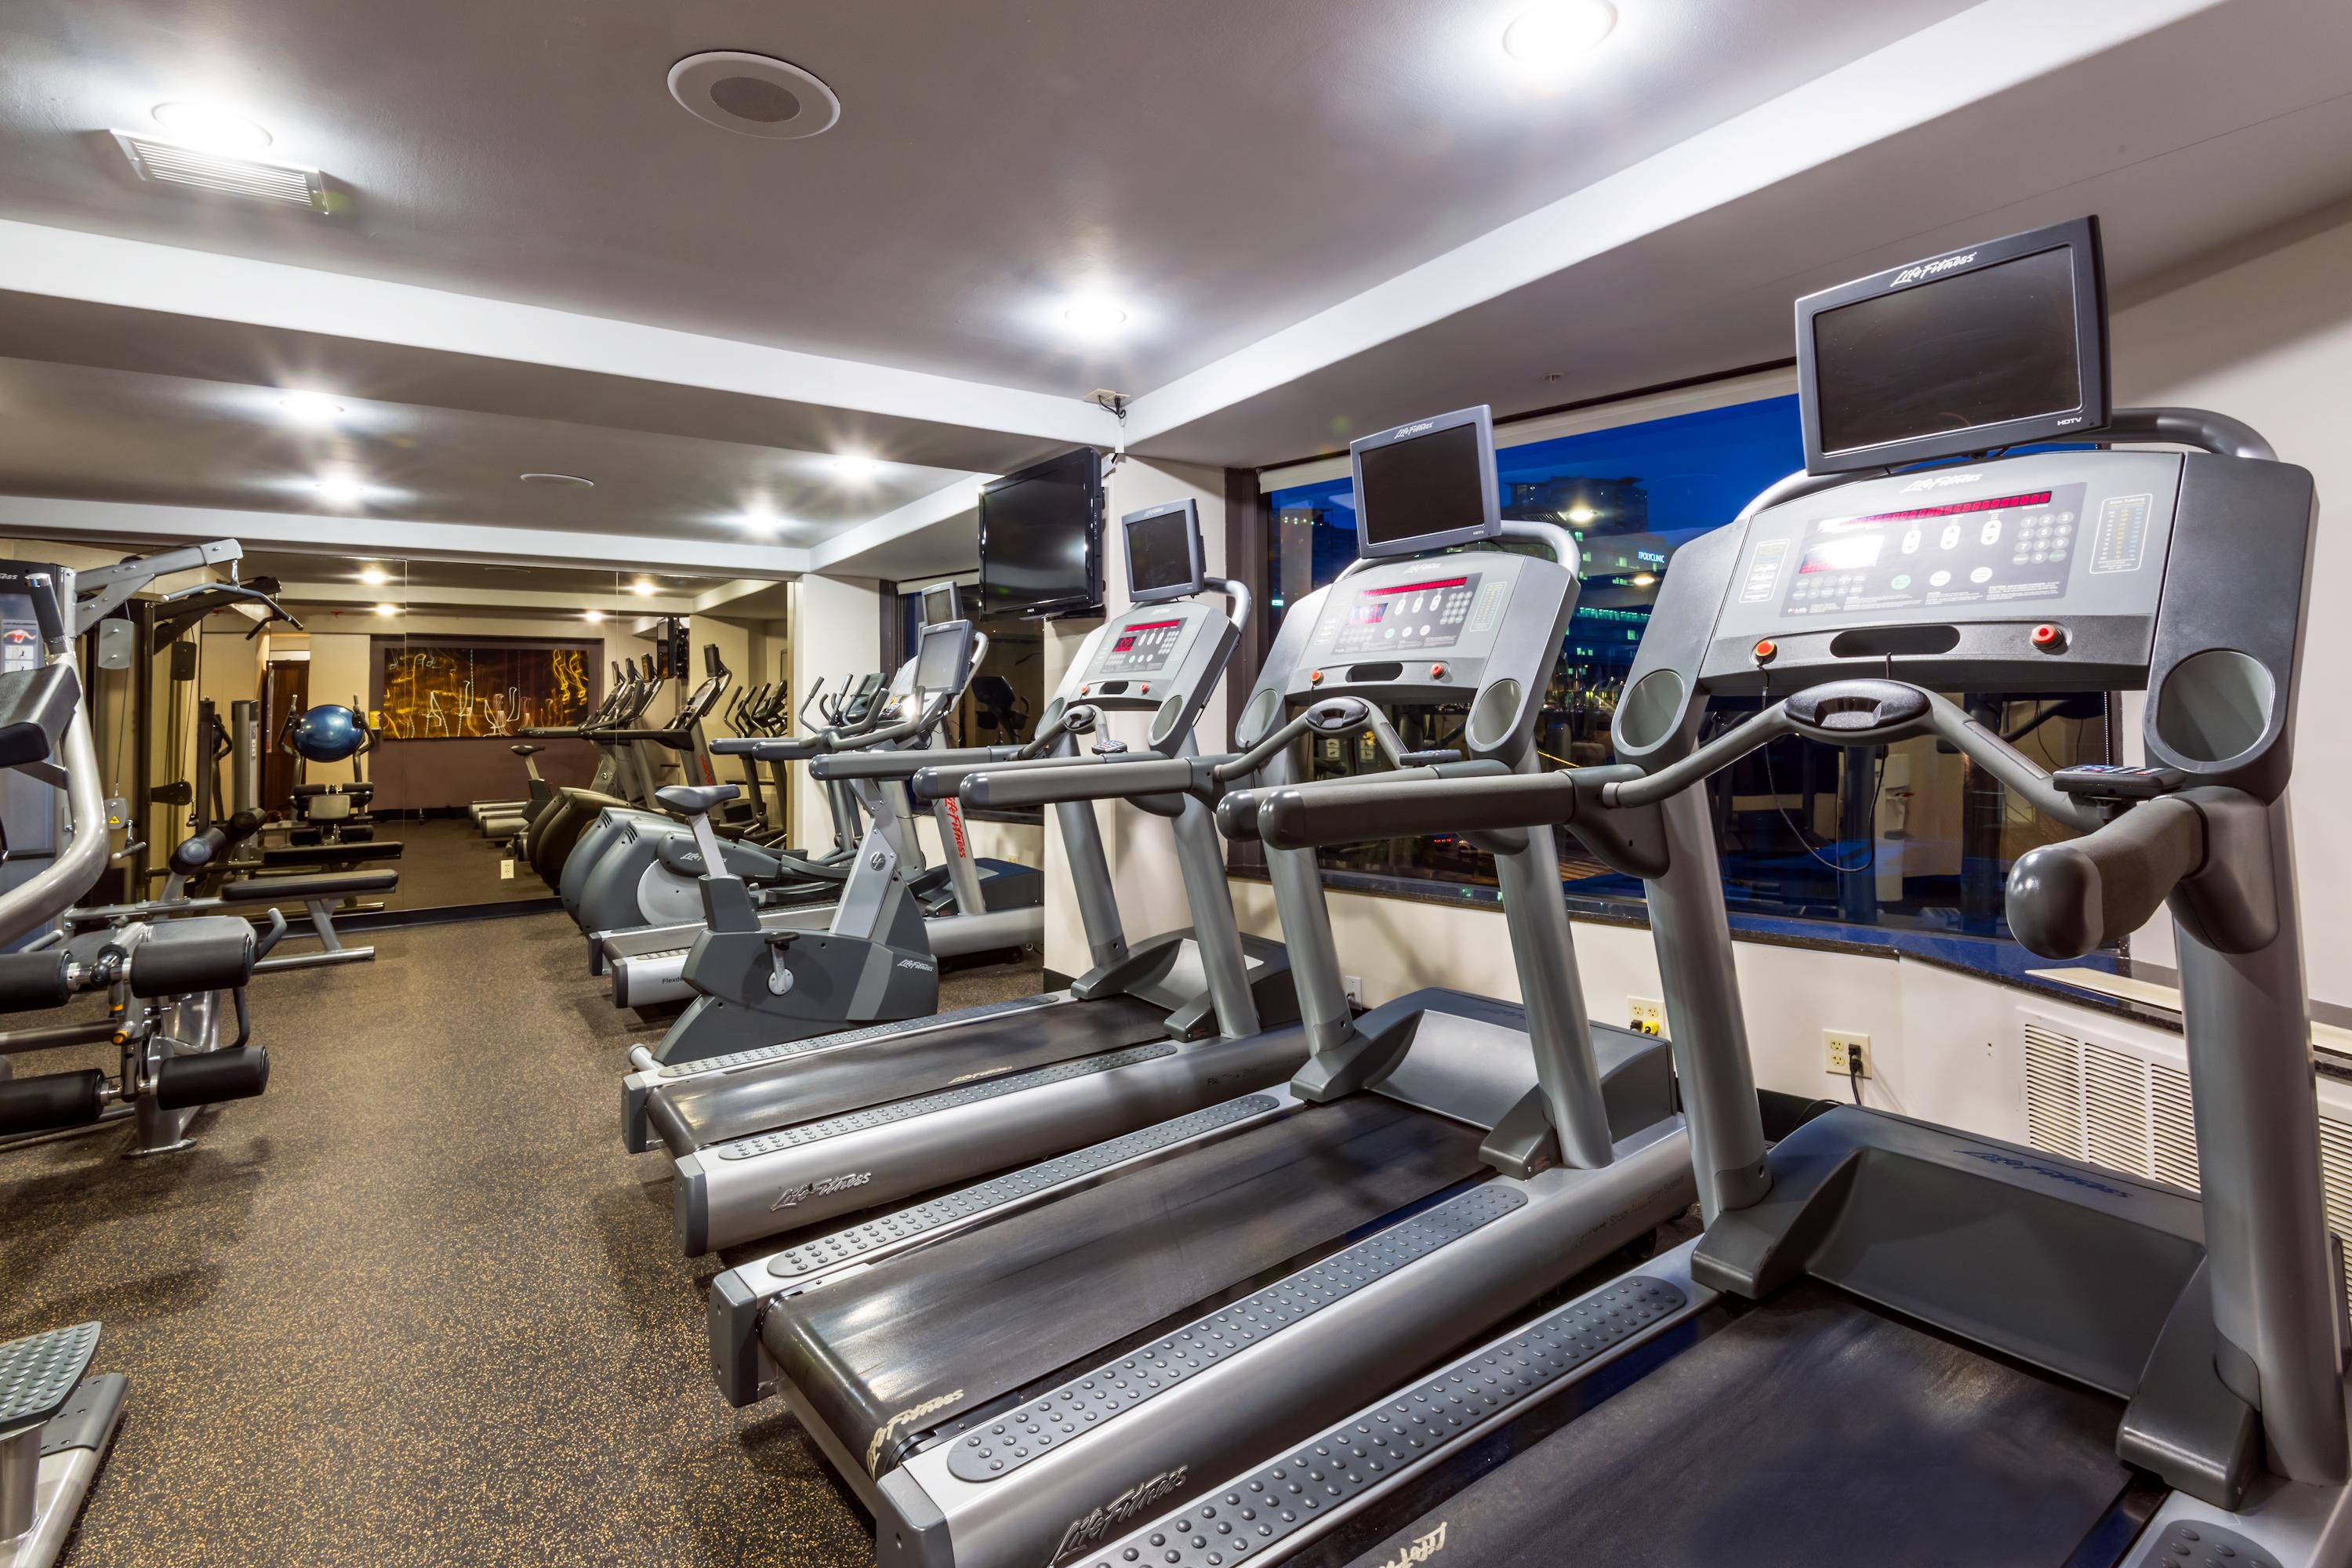 Stay Healthy using the new Cardio Equipment at the Crowne Plaza